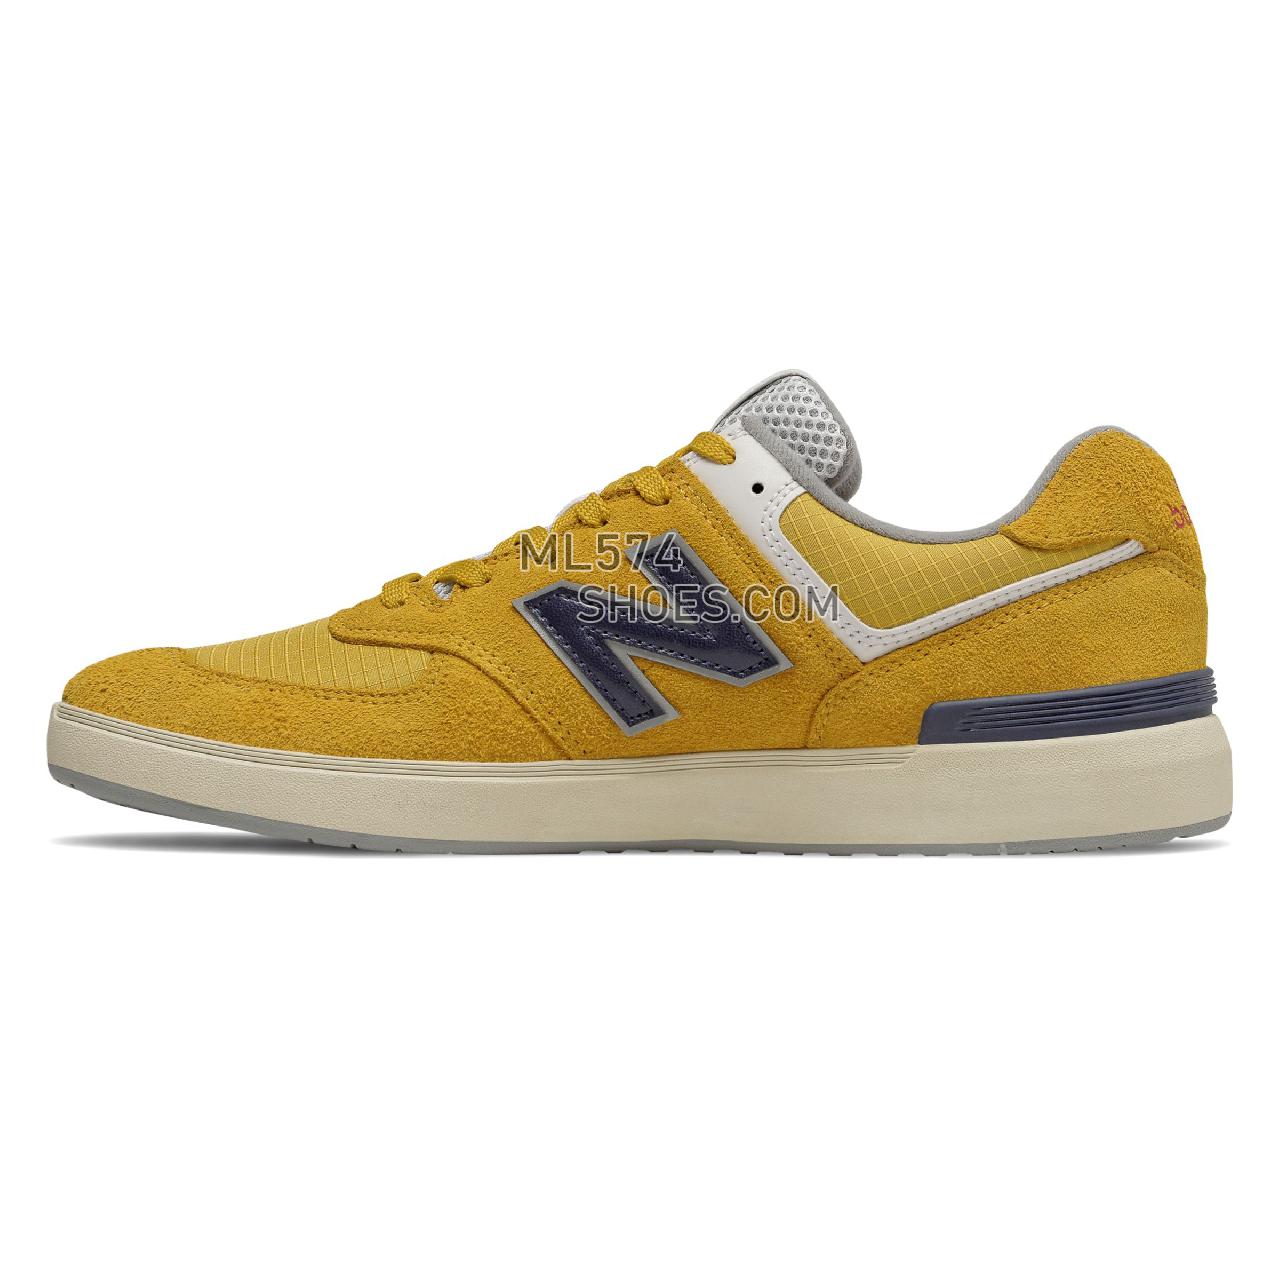 New Balance All Coasts 574 - Men's Court Classics - Sunflower with Navy - AM574SWR